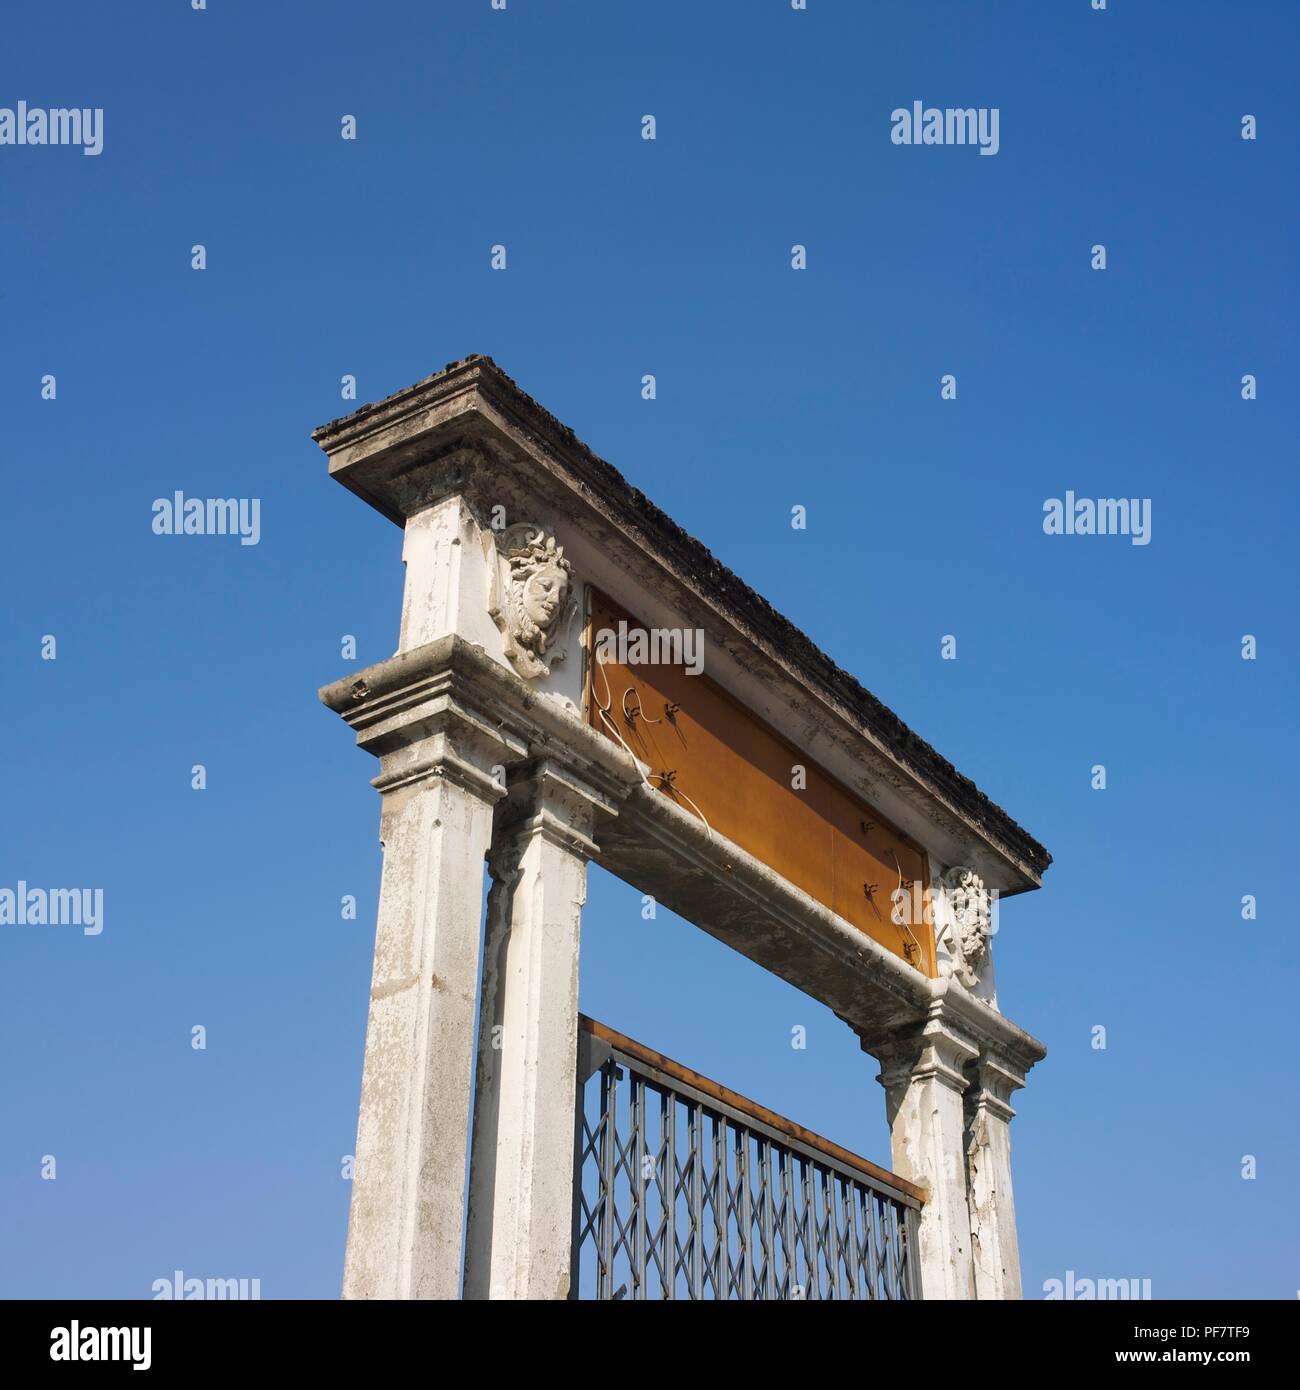 View from below of two pillars topped with sculpture on a blue sky cloudless, France Stock Photo